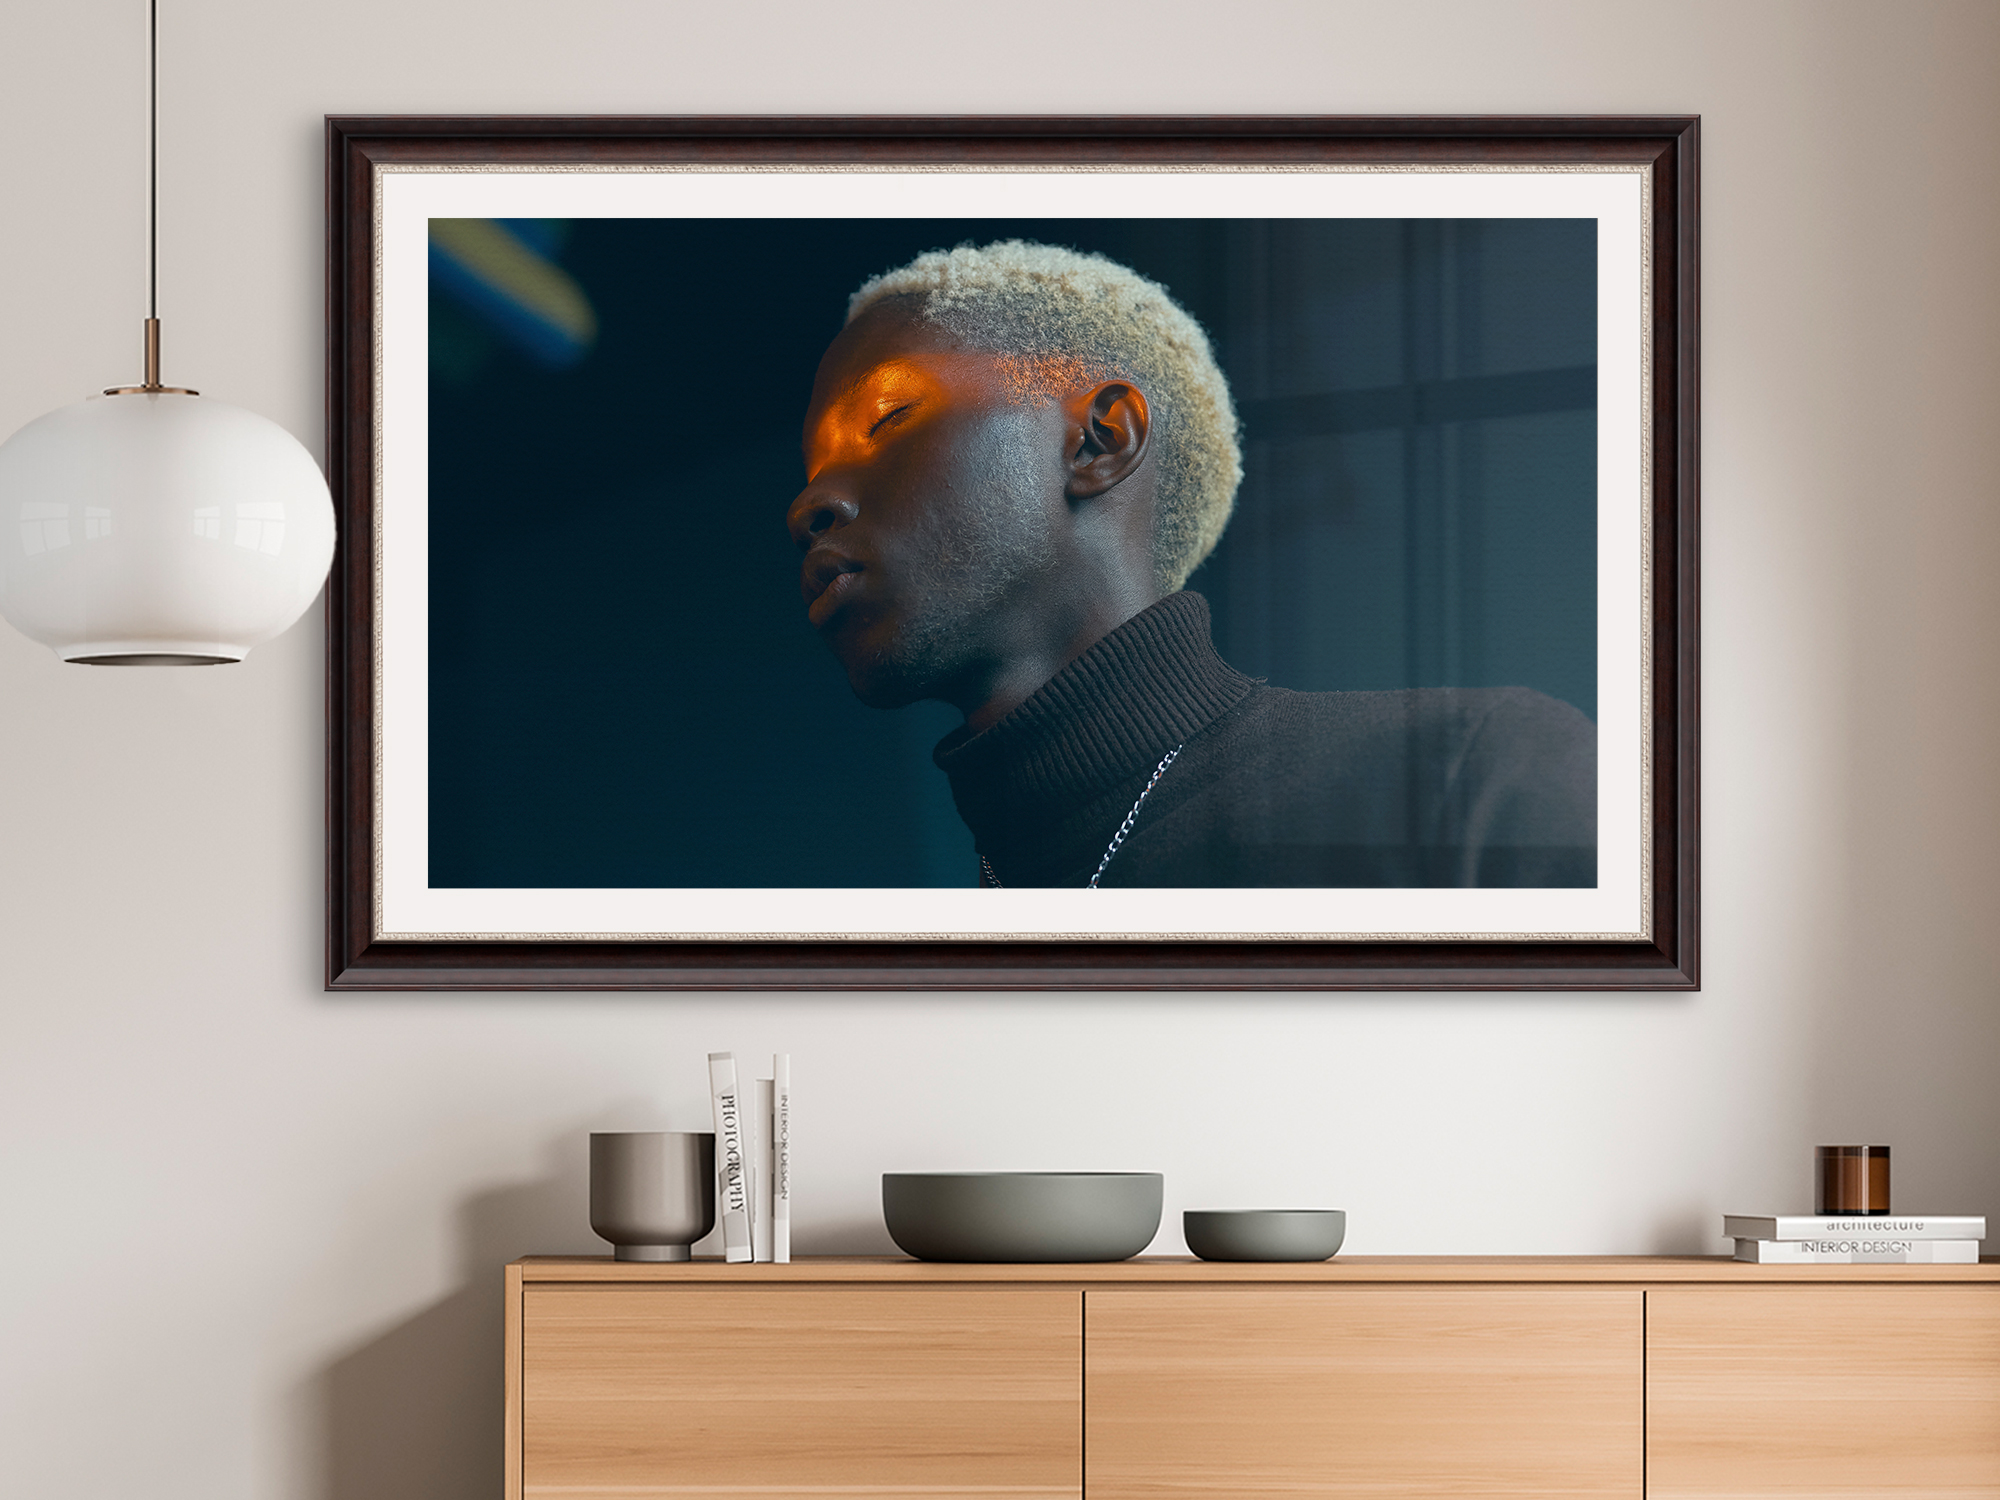 Fine Art Prints on Hahnemühle, Canson and Epson